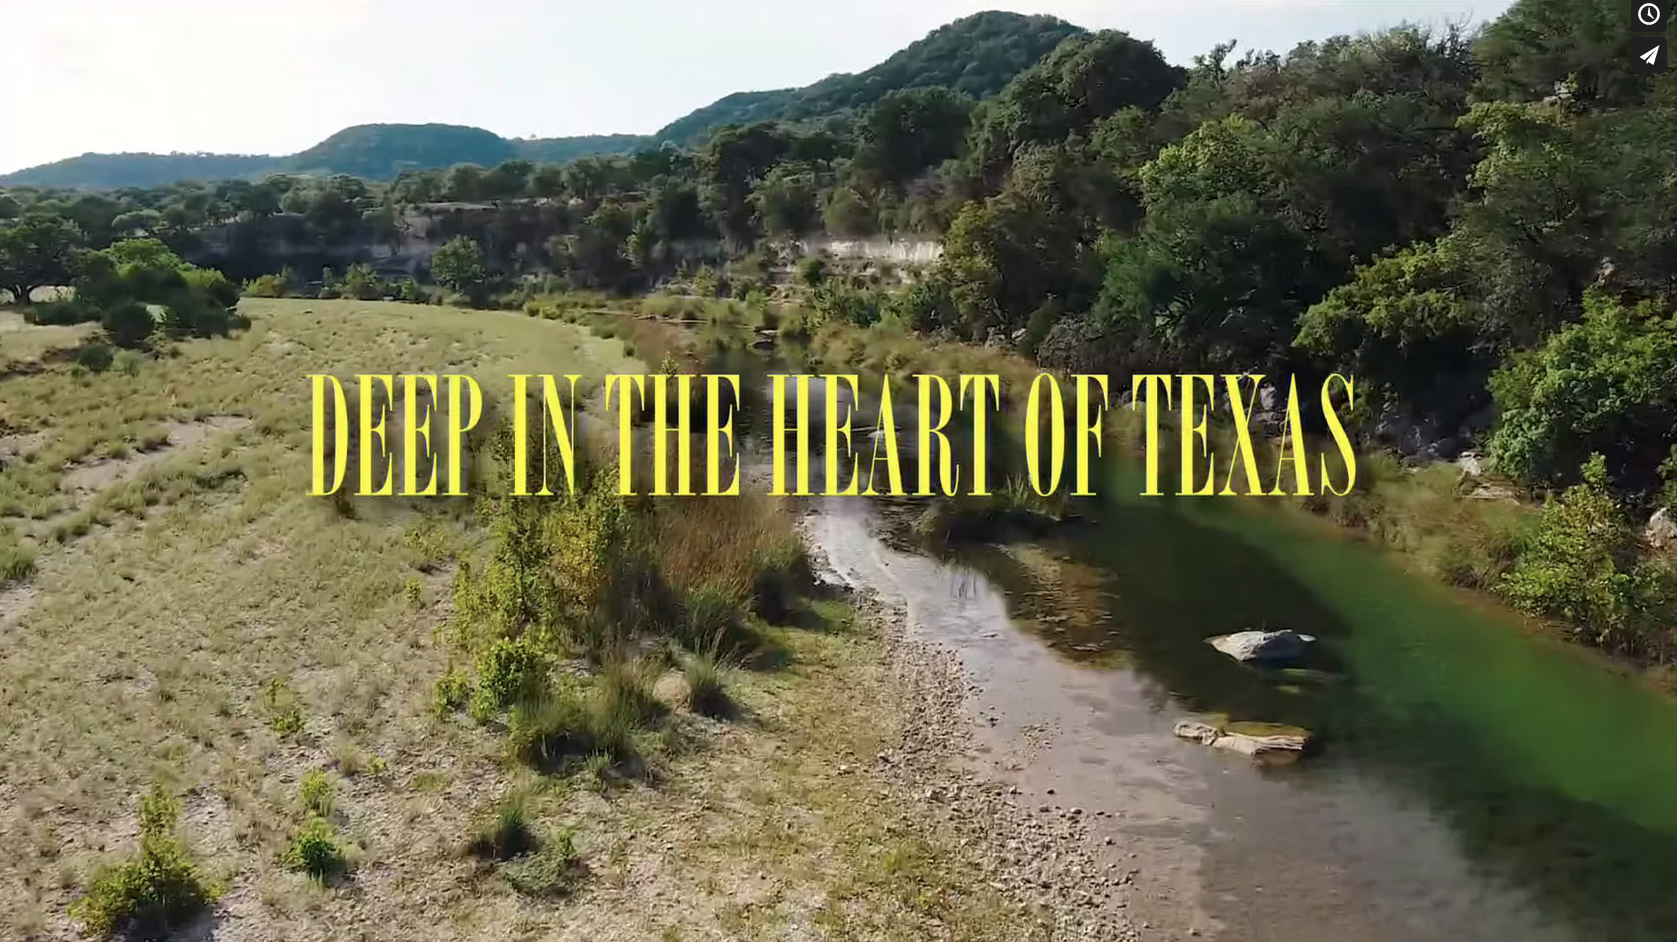  The film takes us to the Texas Hill Country where Enid and Frederic Collins ranched, had a family -- and founded Collins of Texas. Credit: Michael Maloy, 2022 